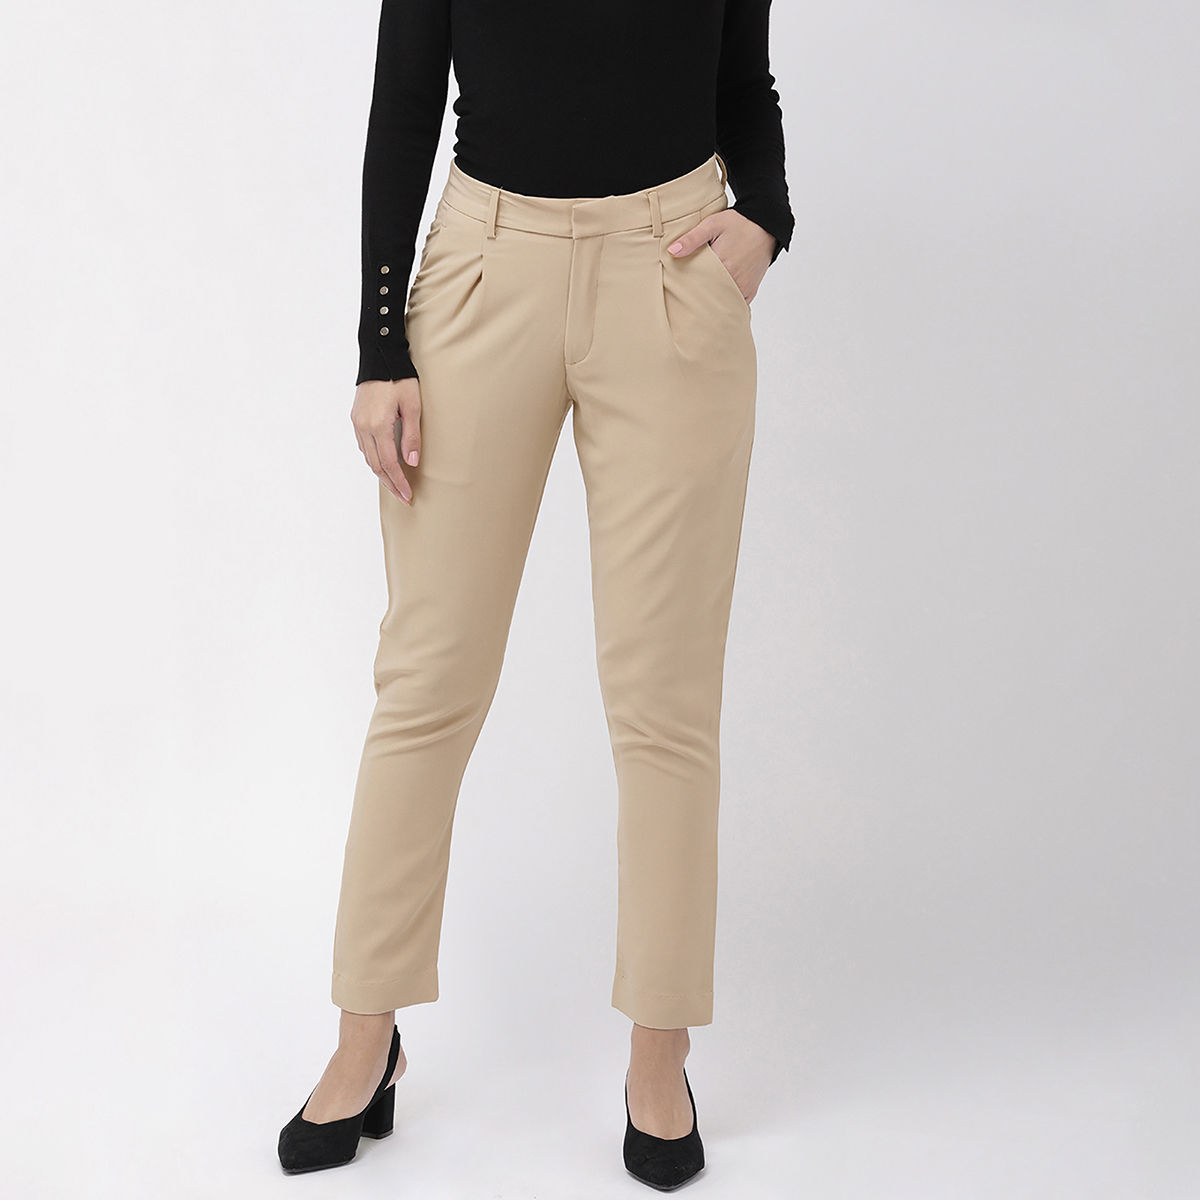 Men Trousers  Buy Trousers for Men Online in India  NNNOW